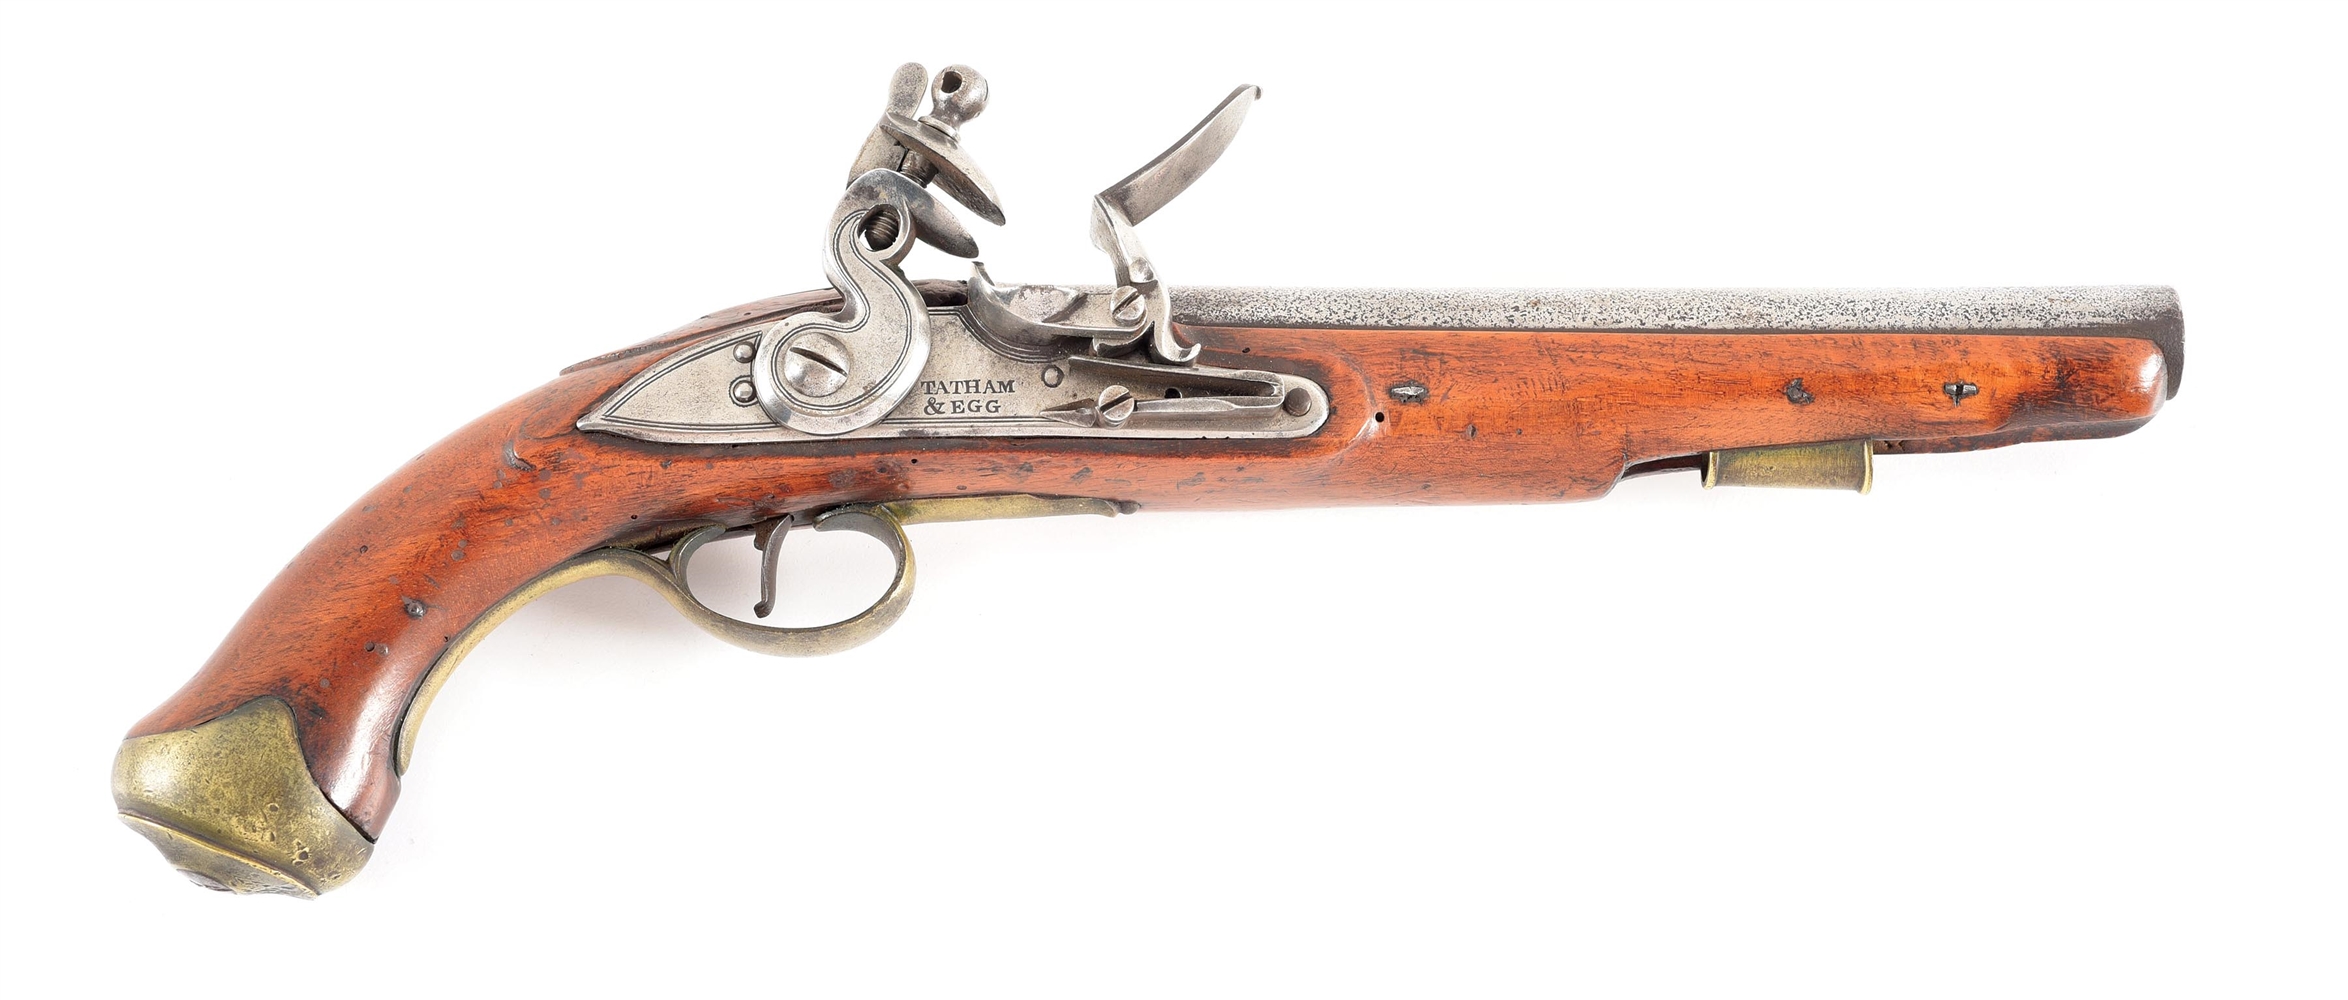 (A) TATHAM & EGG FLINTLOCK PISTOL WITH PRIVATE TOWER PROOFS.